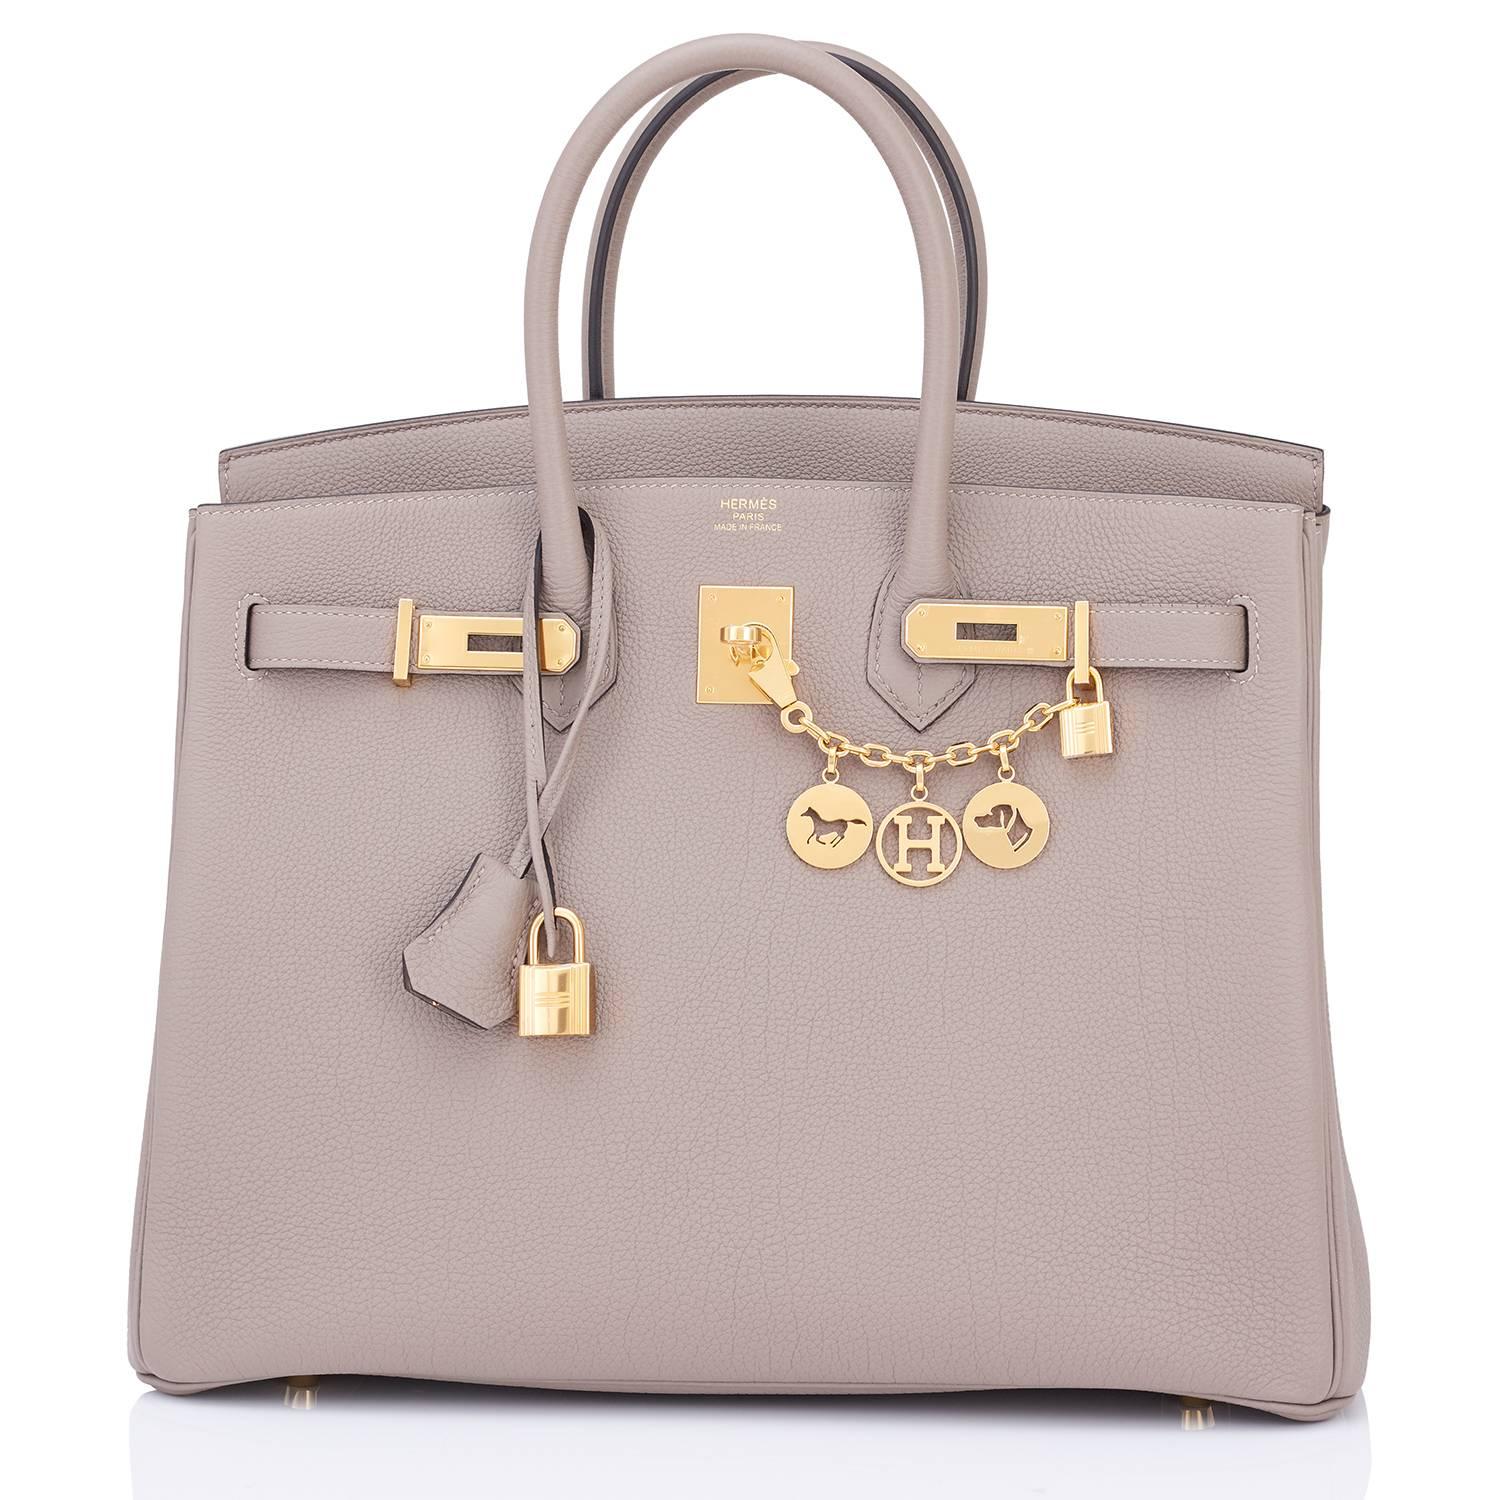 Devastatingly gorgeous!  Gris Asphalte is a brand new color, and the best neutral to come from Hermes in many years.
Brand New in Box. Store fresh. Pristine Condition (with plastic on hardware). 
Perfect gift! Comes in full set with lock, keys,